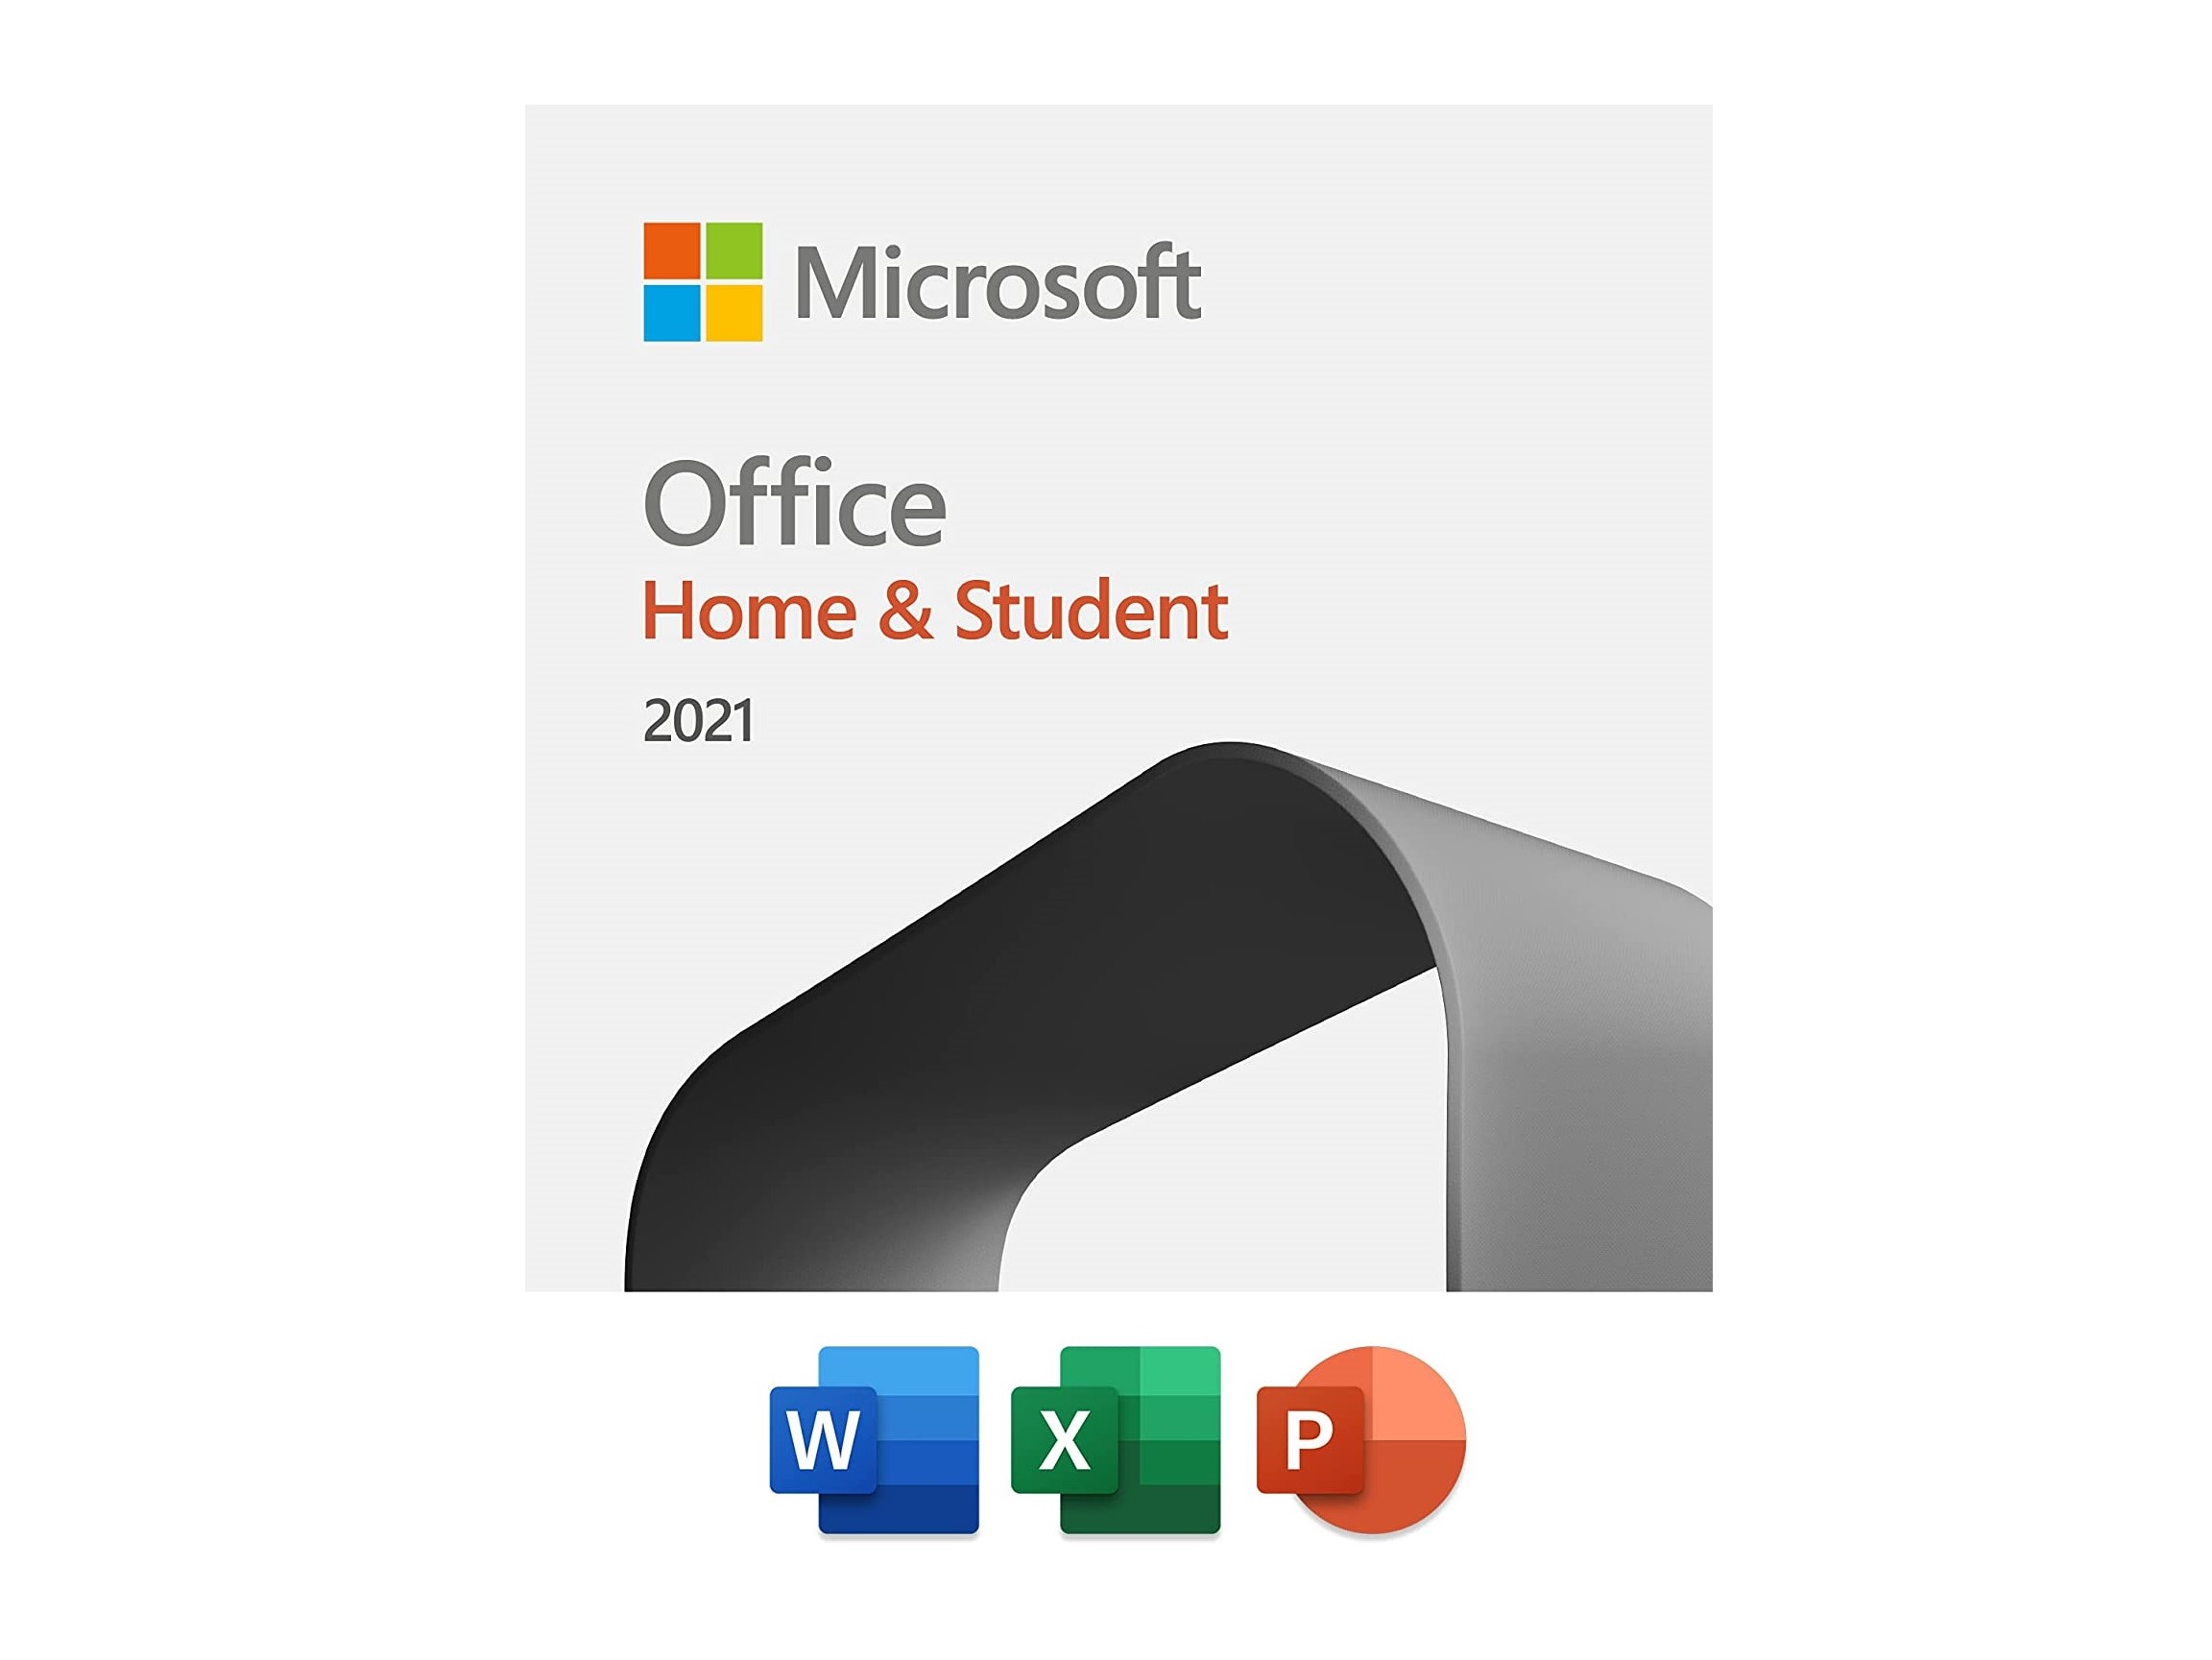 Microsoft Office Home & Student 2021 local license cover image.